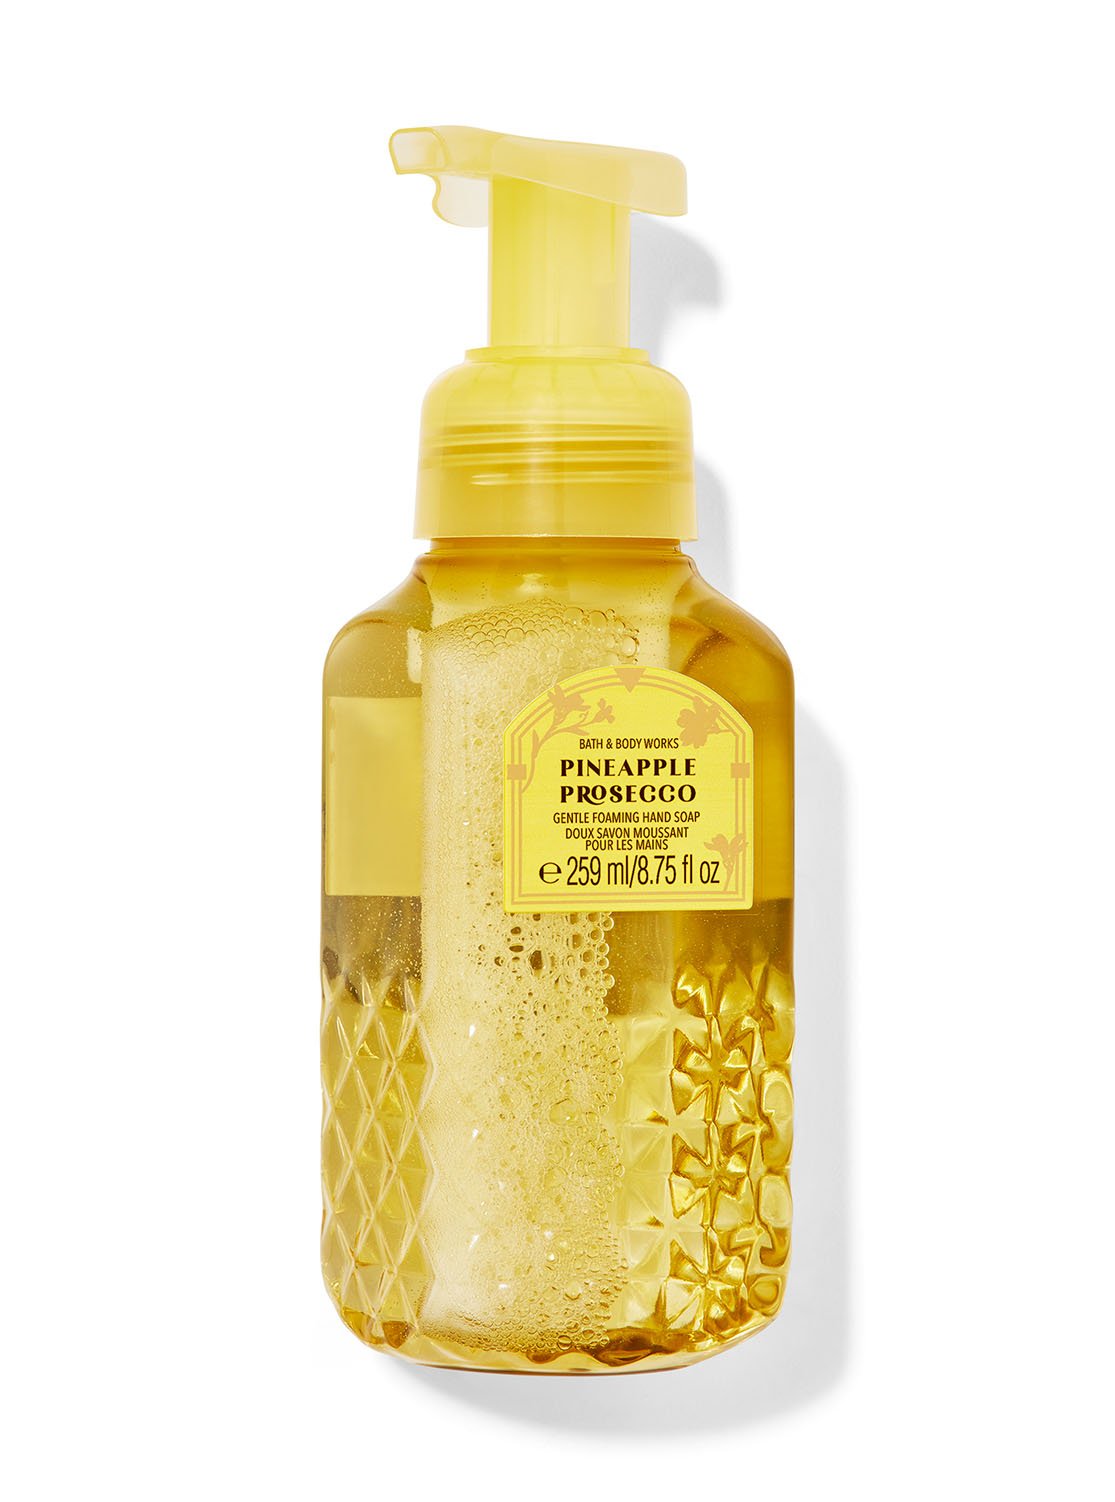 Pineapple Prosecco Gentle Foaming Hand Soap | Bath and Body Works